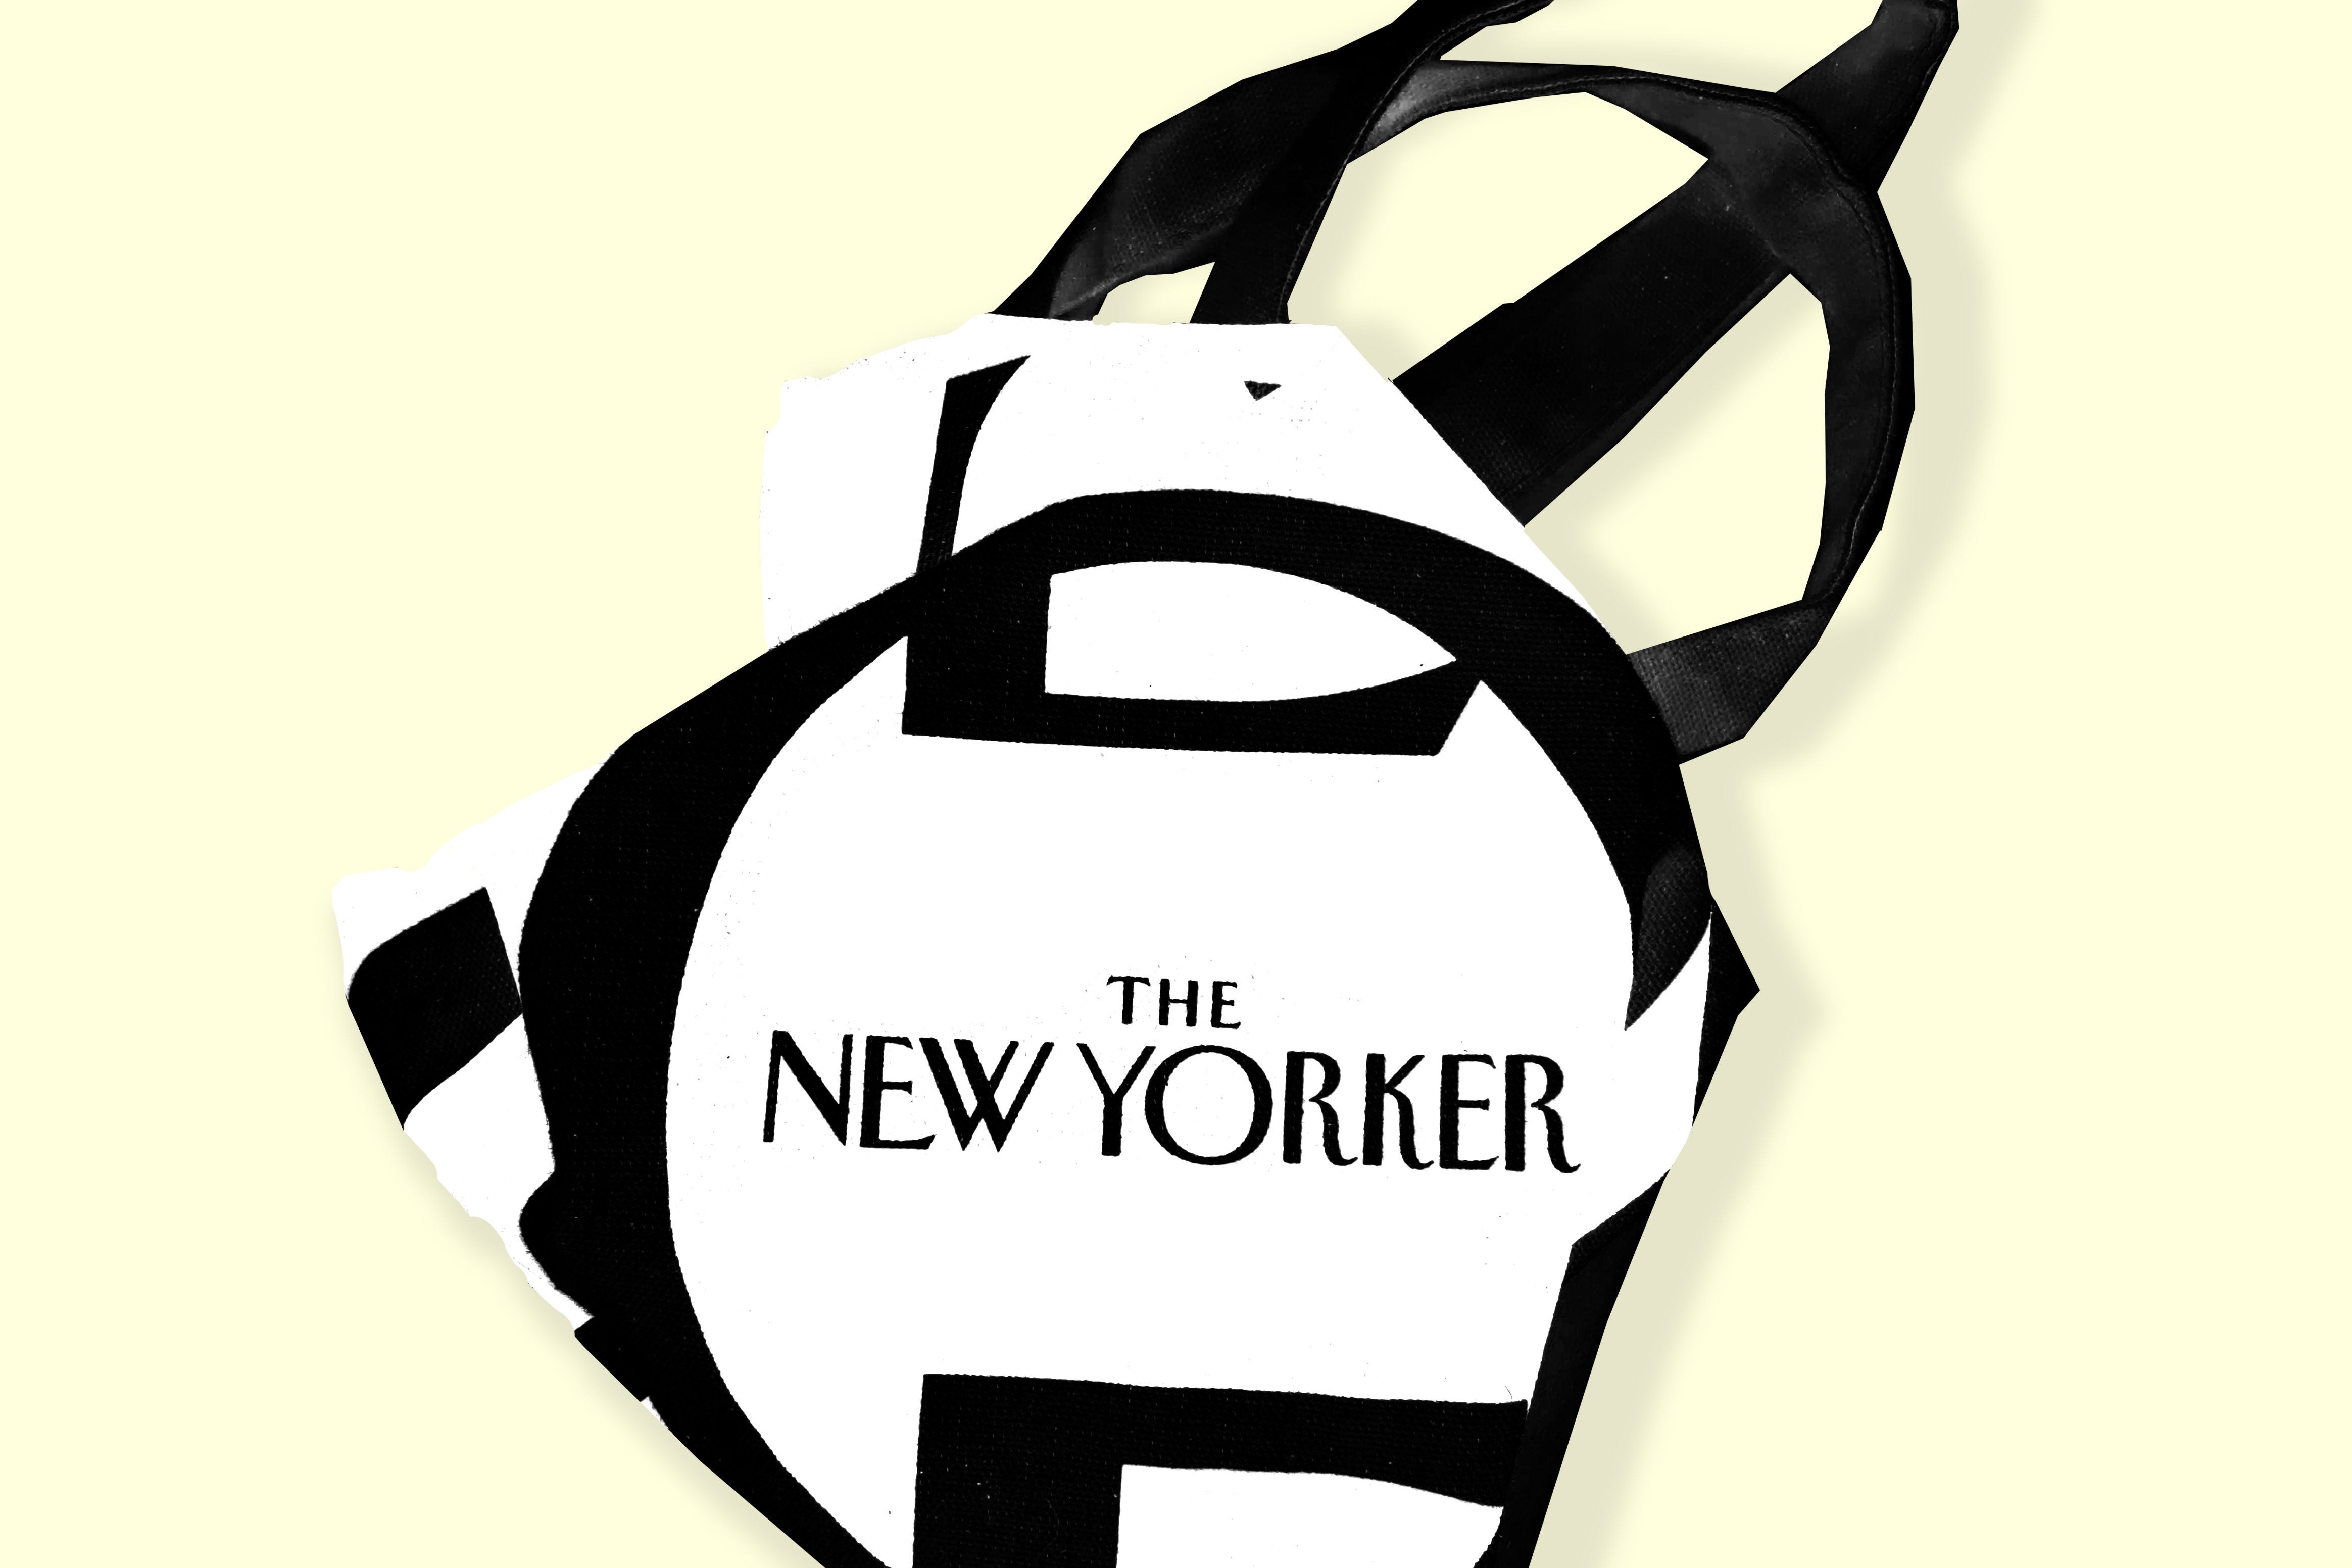 A New Yorker tote bag.